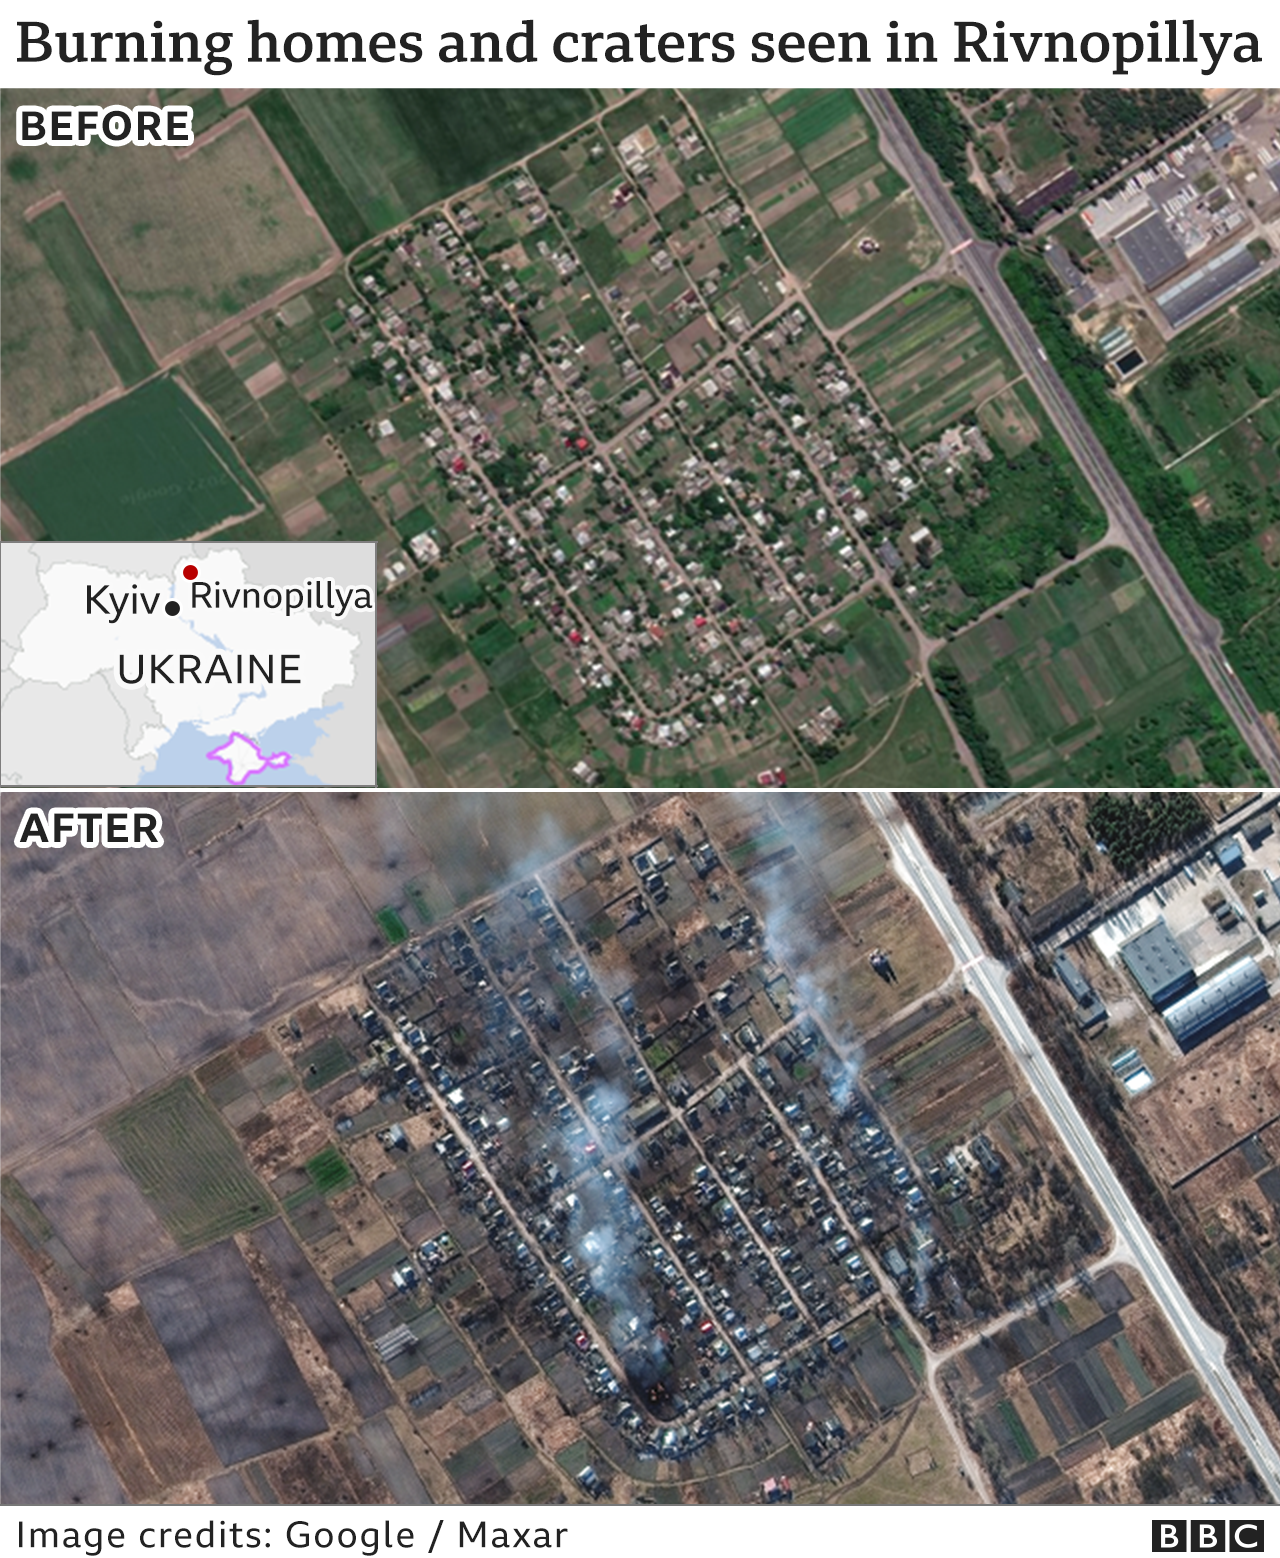 Images showing before and after an attack on Rivnopillya in Ukraine